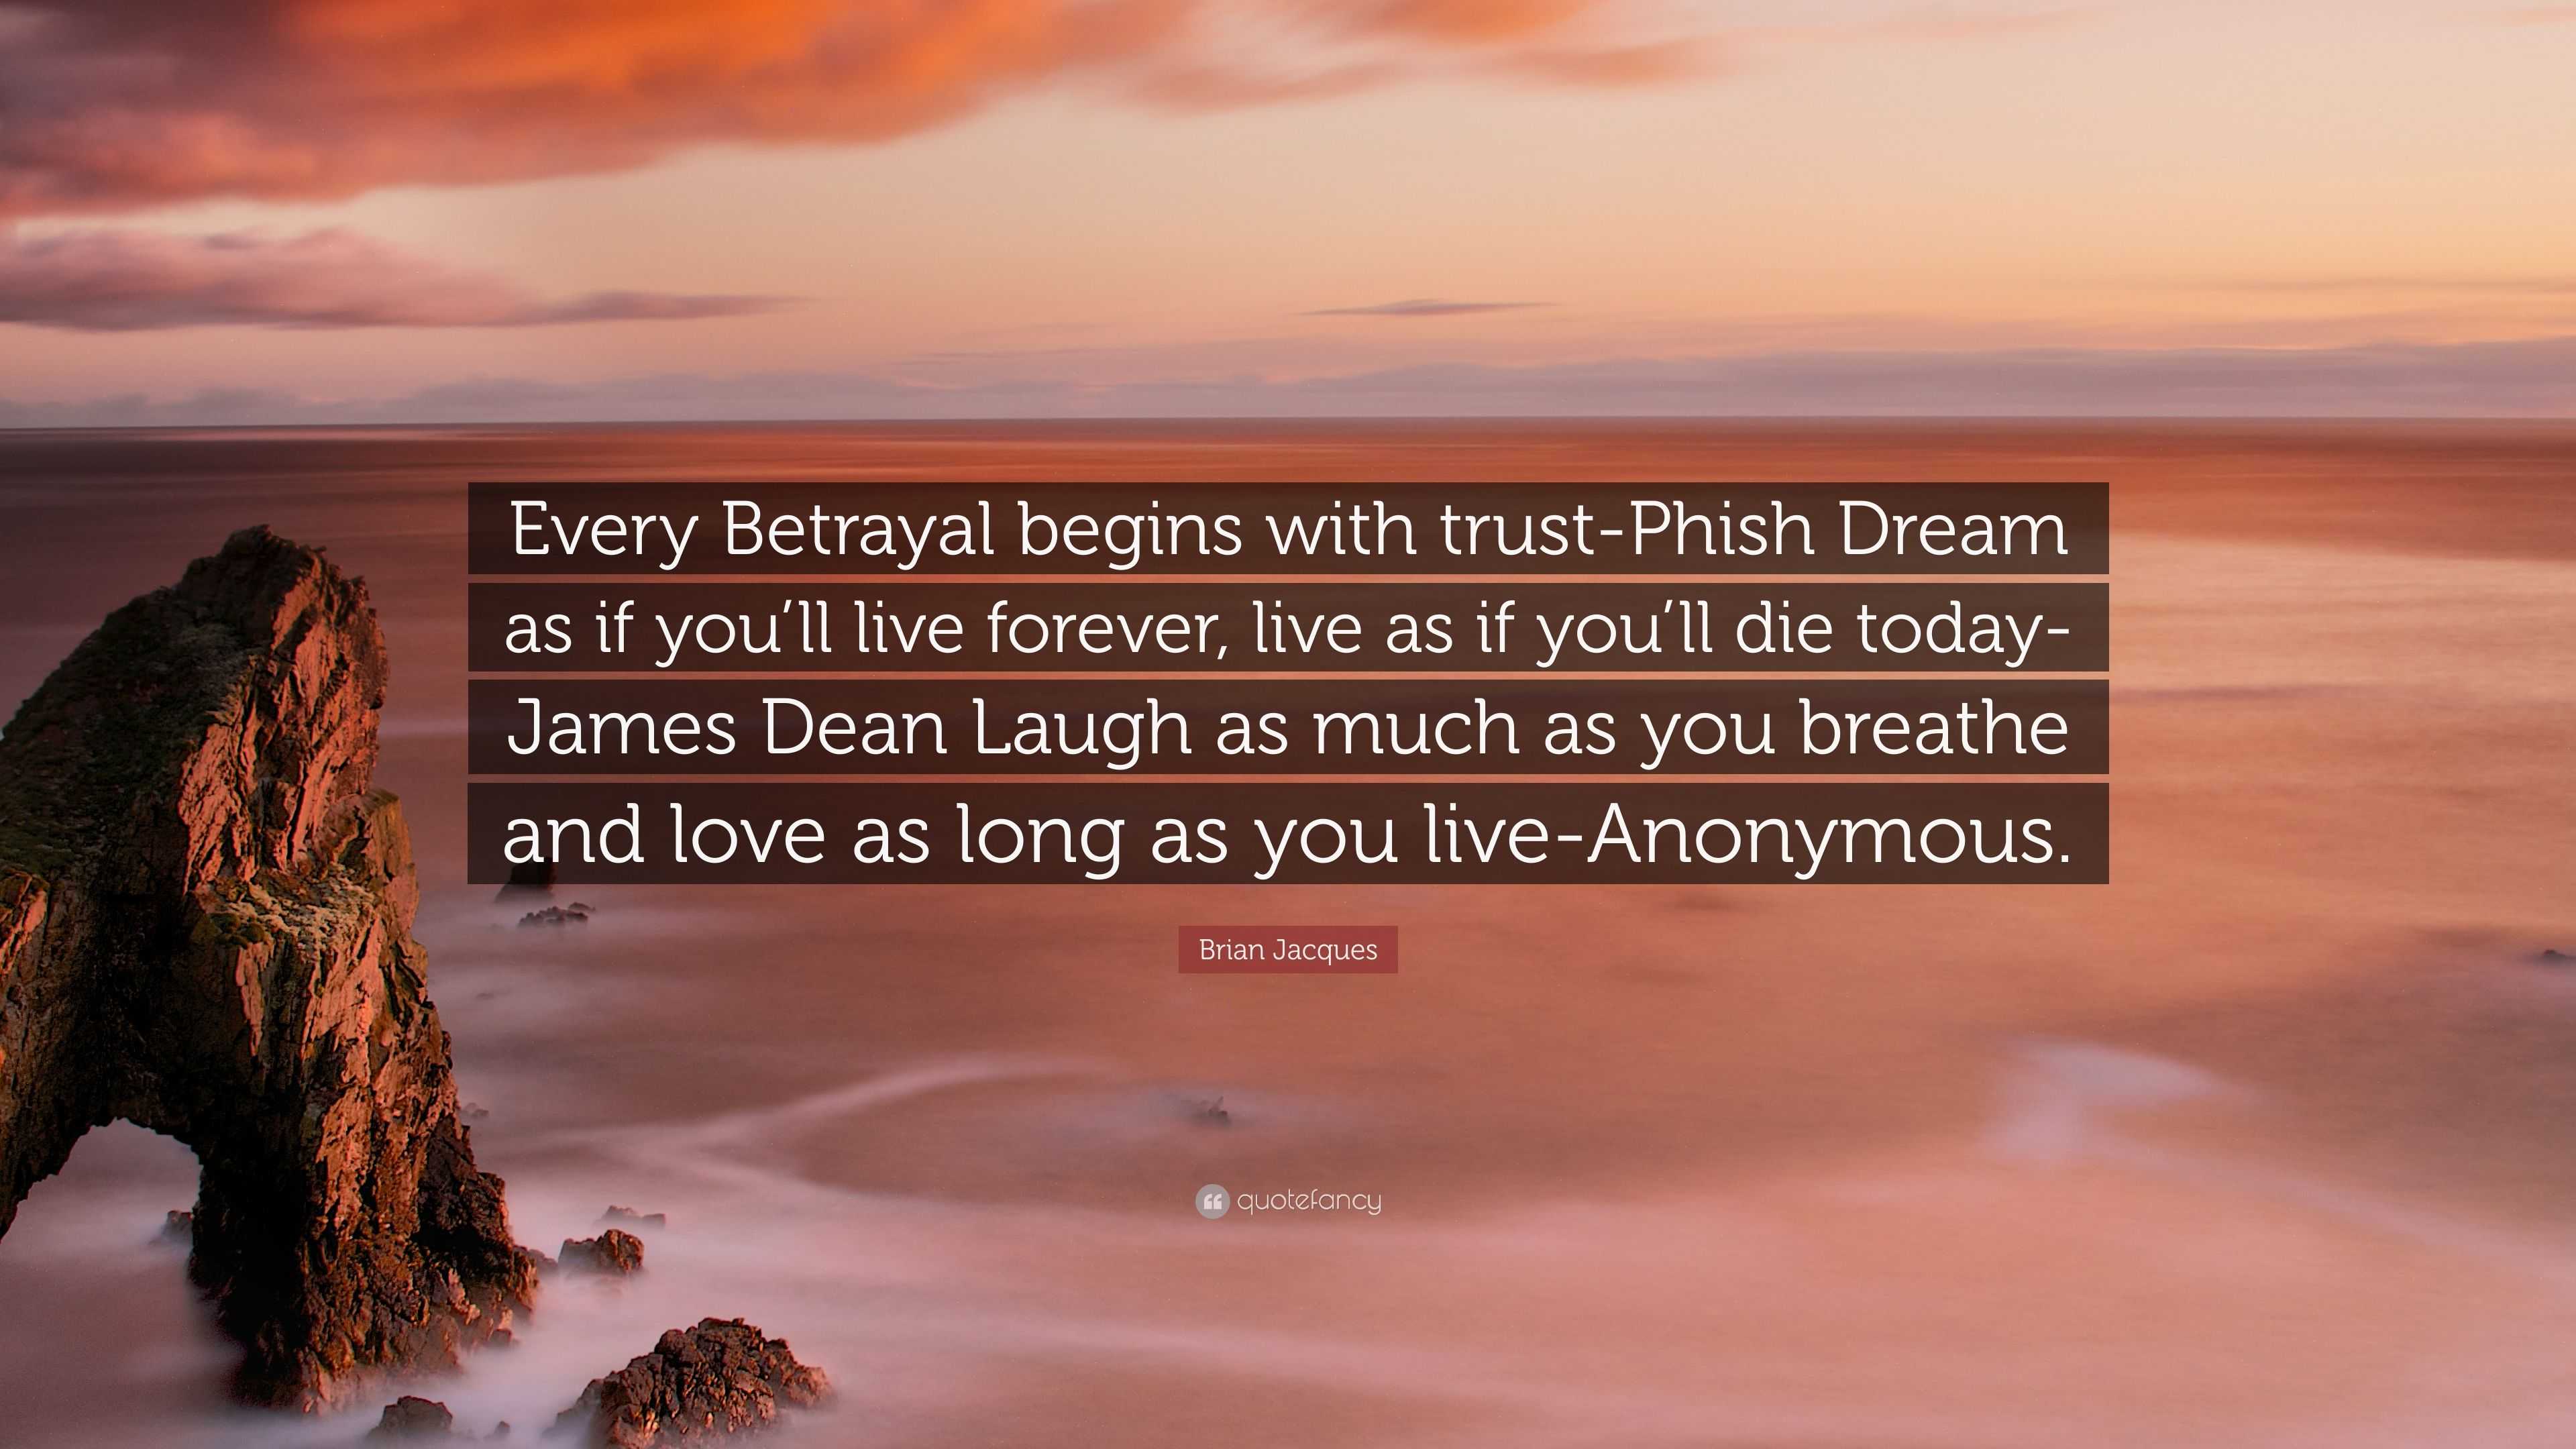 Brian Jacques Quote Every Betrayal Begins With Trust Phish Dream As If You Ll Live Forever Live As If You Ll Die Today James Dean Laugh As